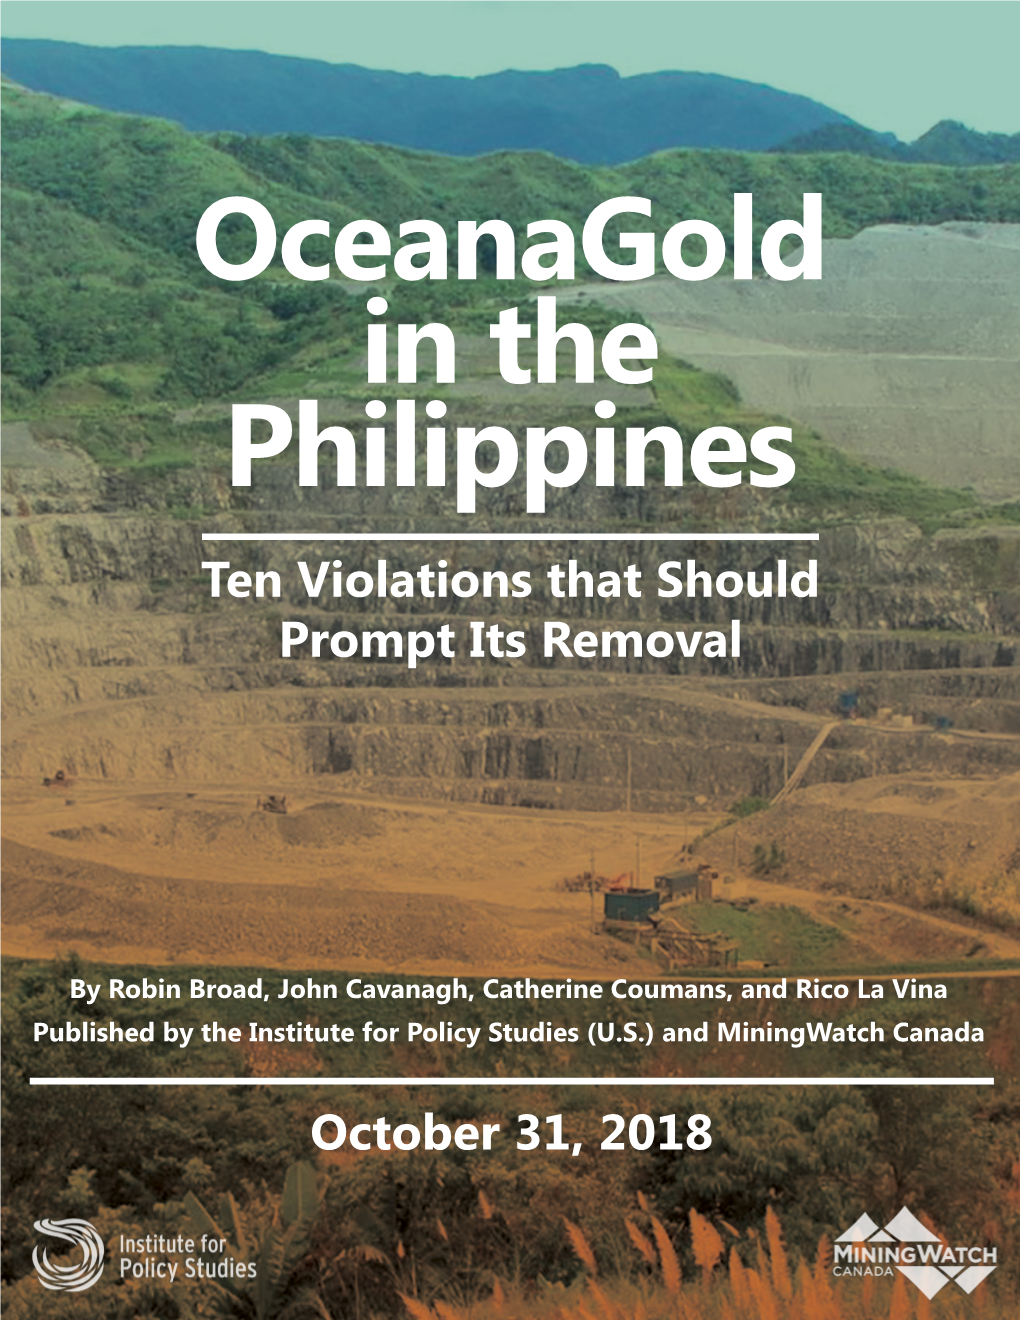 Oceanagold in the Philippines Ten Violations That Should Prompt Its Removal